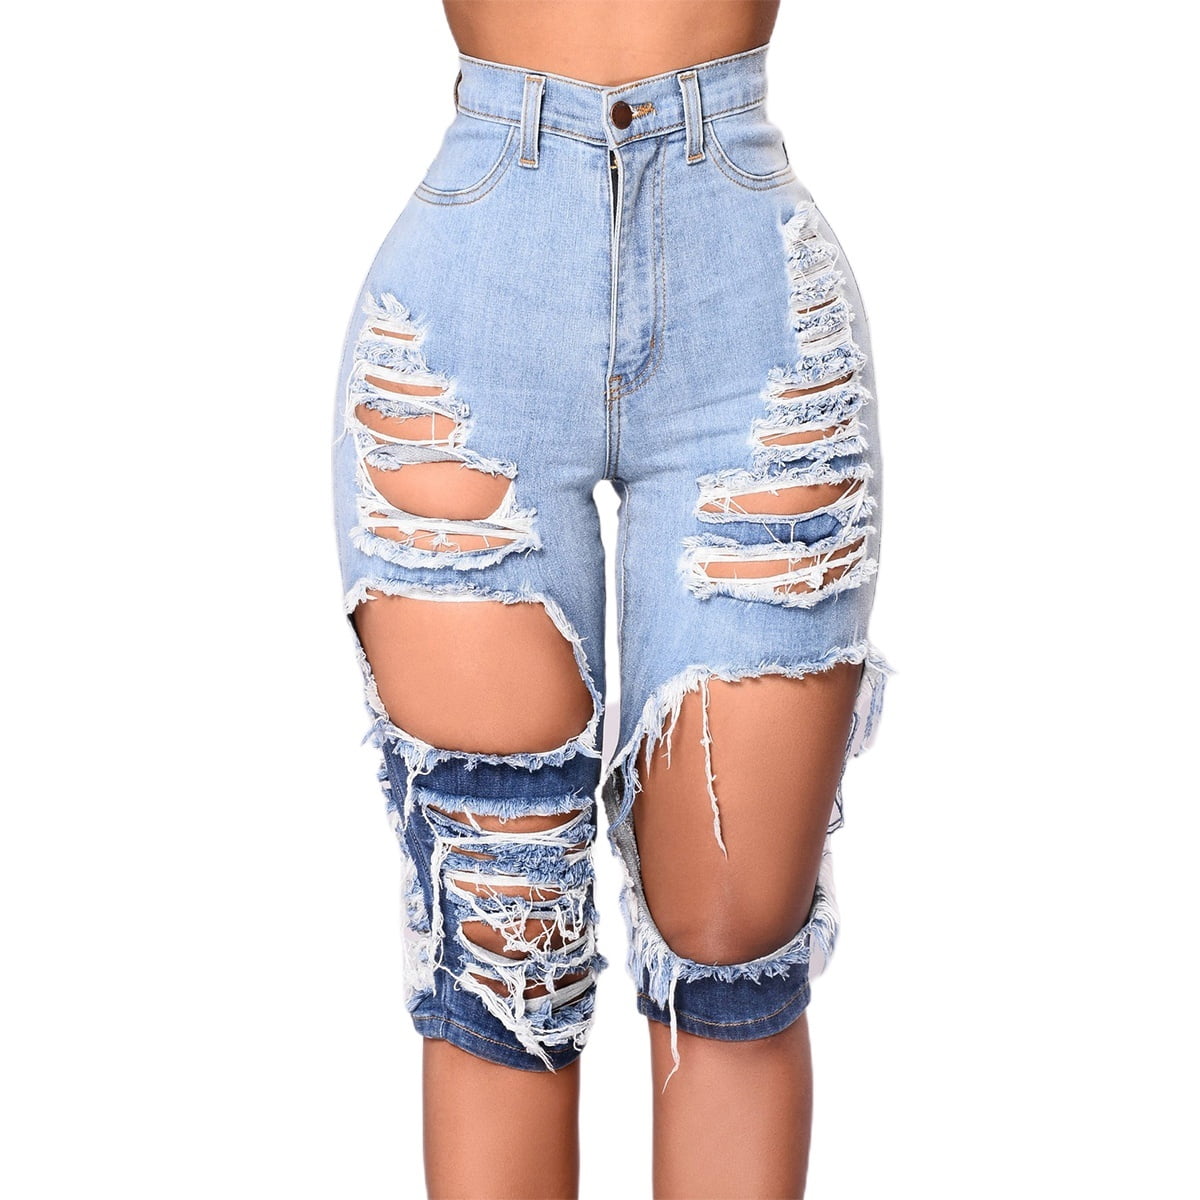 Female Ripped Jeans Fashionable High Waist Jeans Close Fitting Pants For Women Smlxlxxl